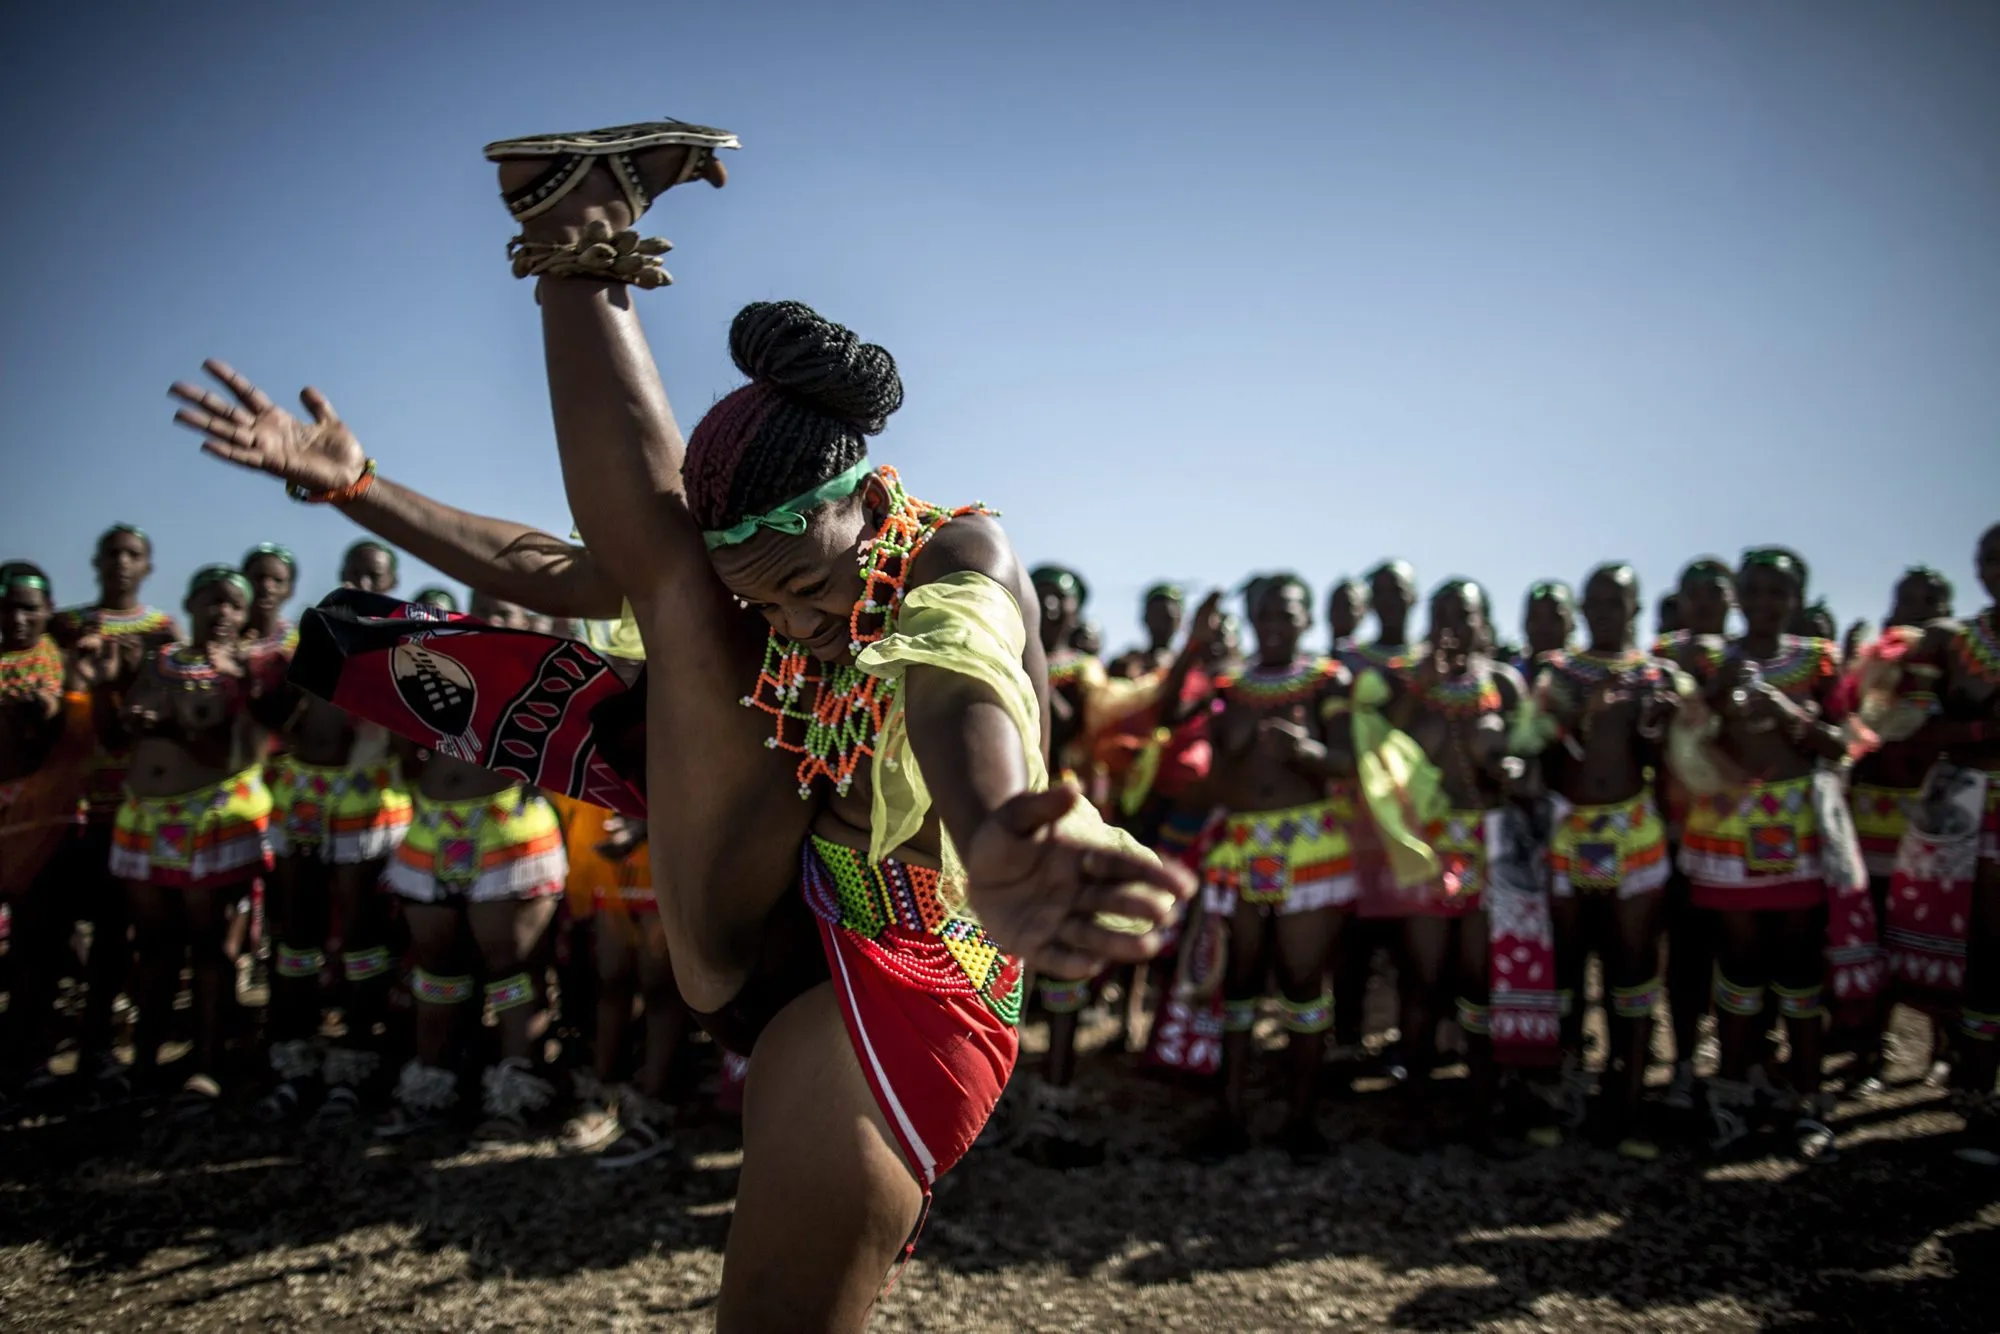 A South African maiden dances as others clap during the Reed Dance ceremony...